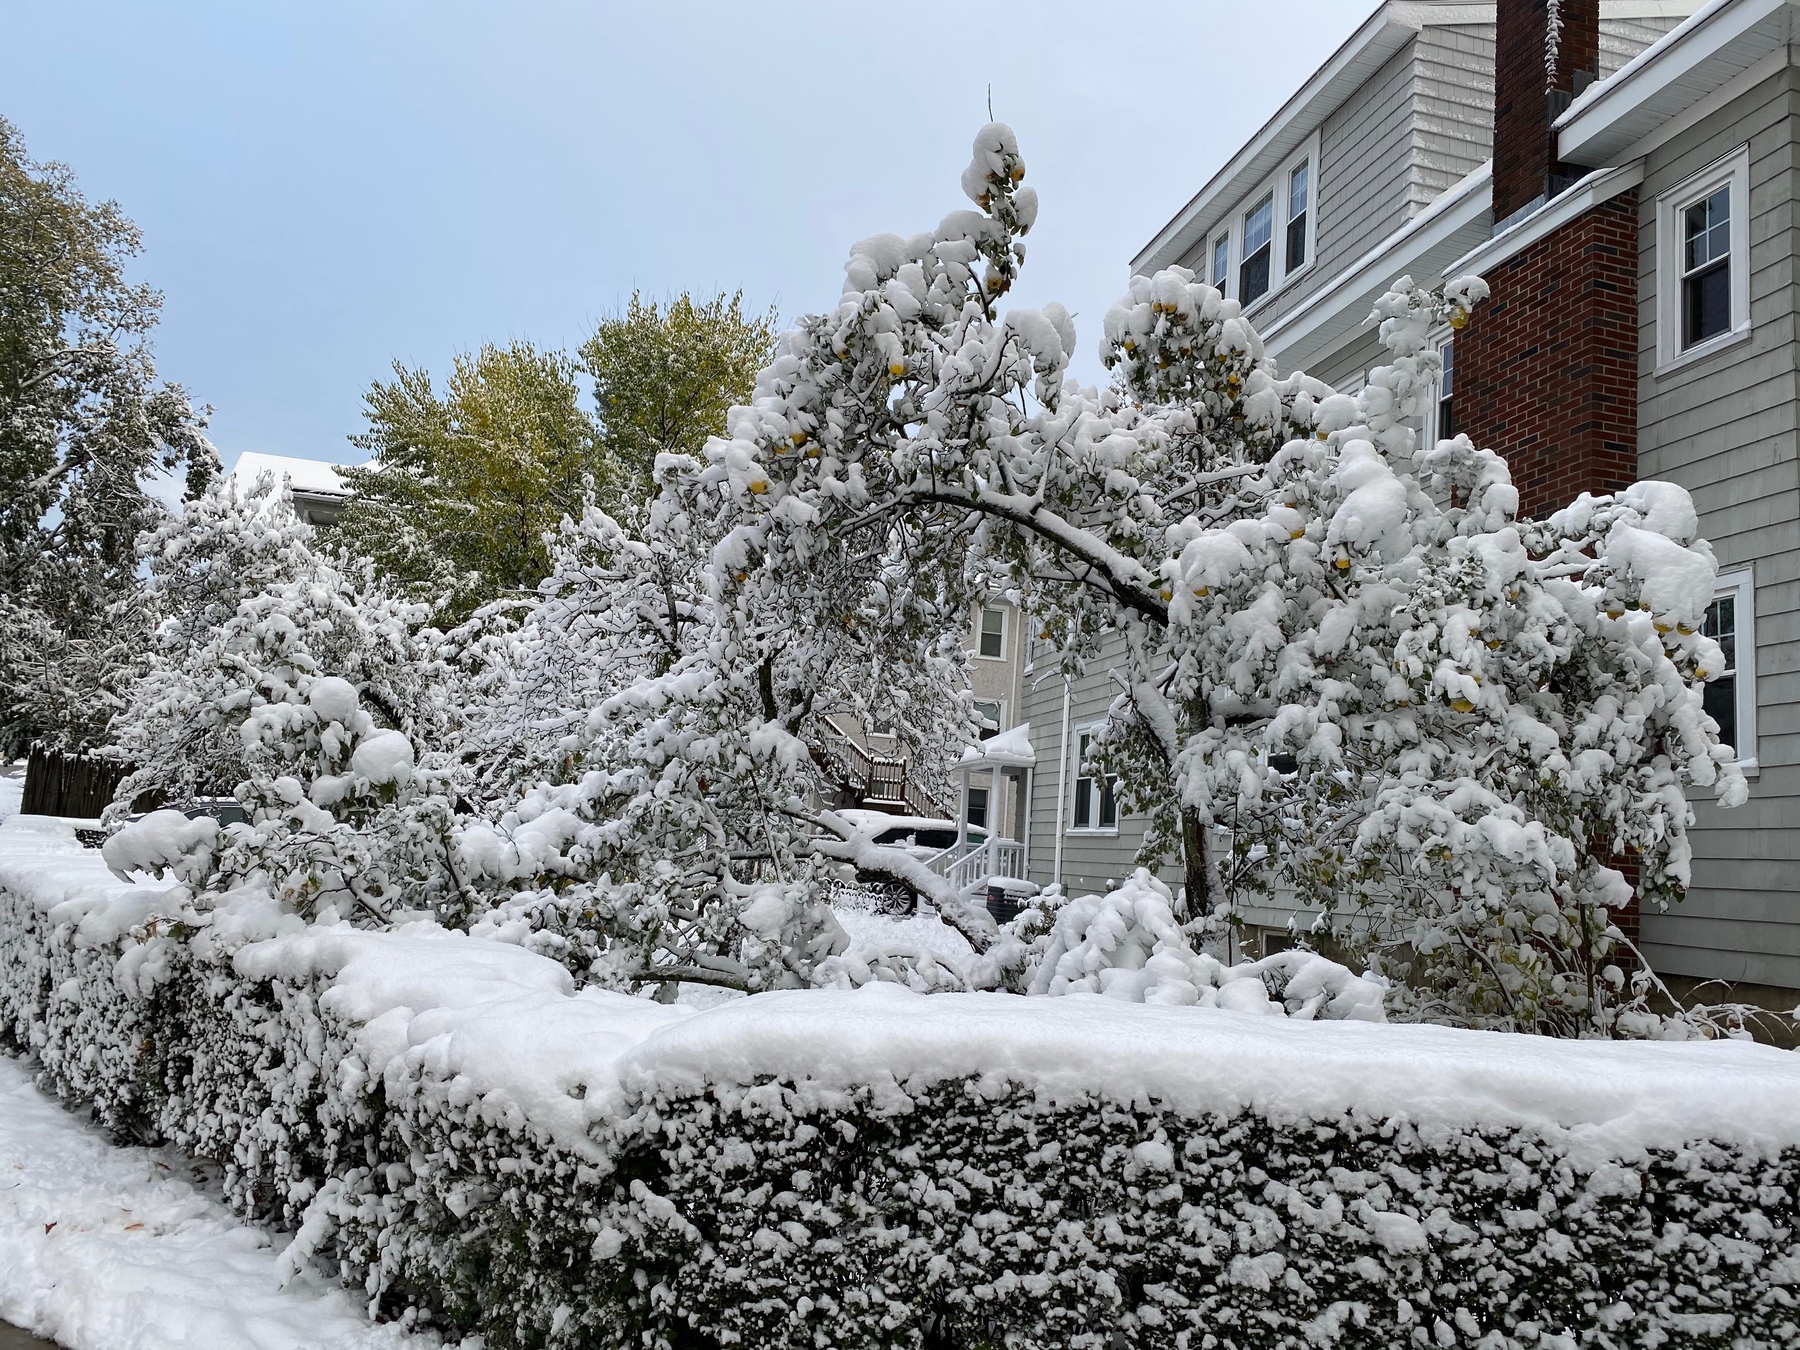 Yard of a house with a hedge and small tree covered in icy snow.